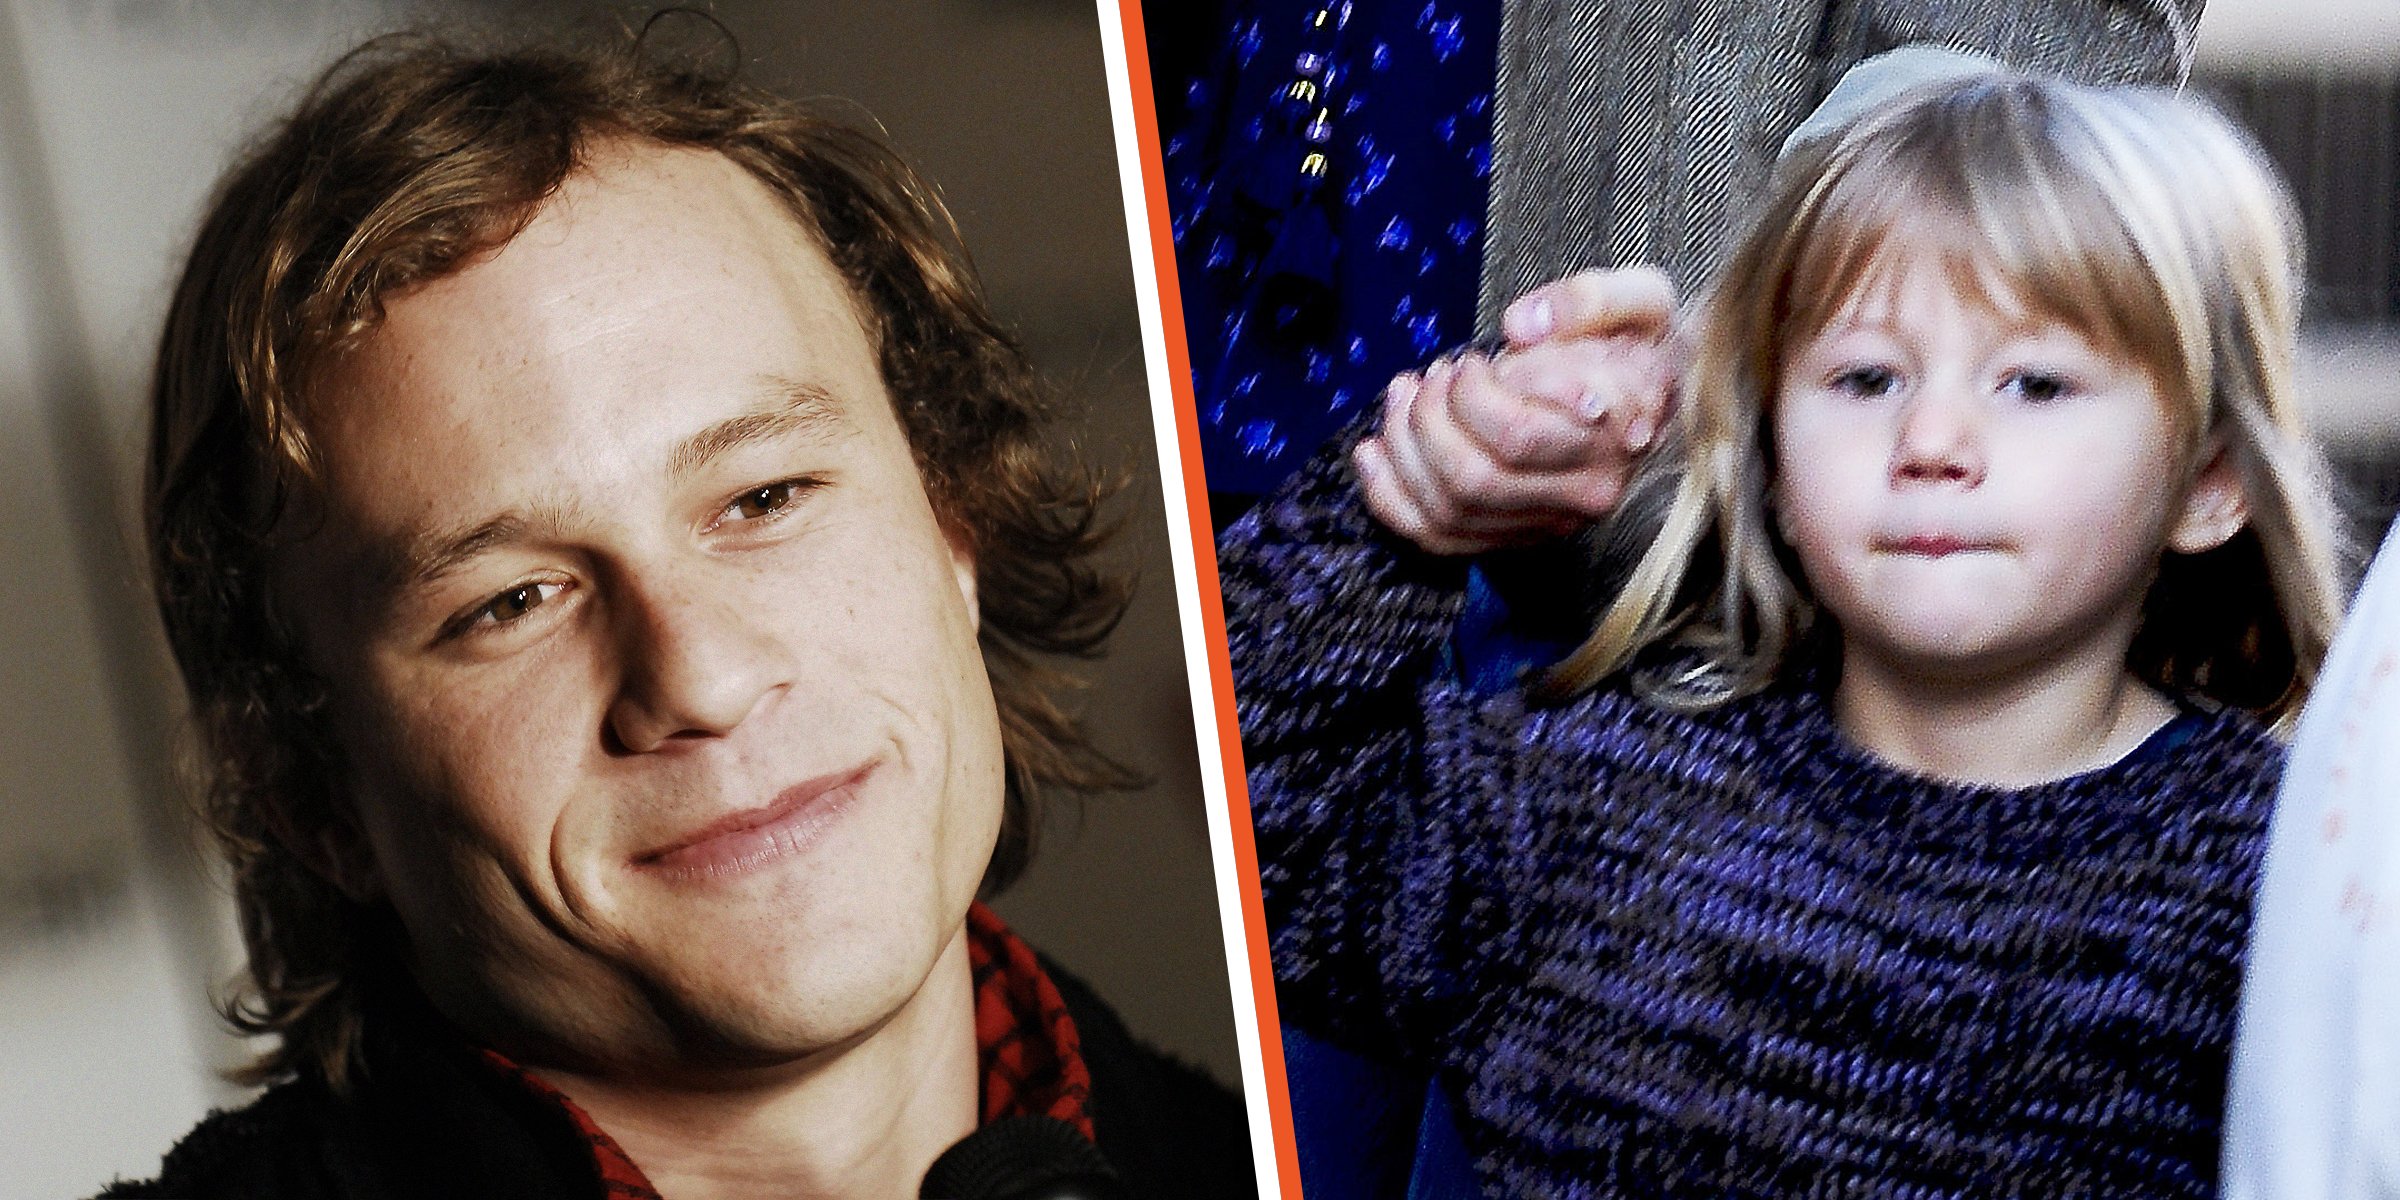 Heath Ledger and his daughter Matilda | Source: Getty Images